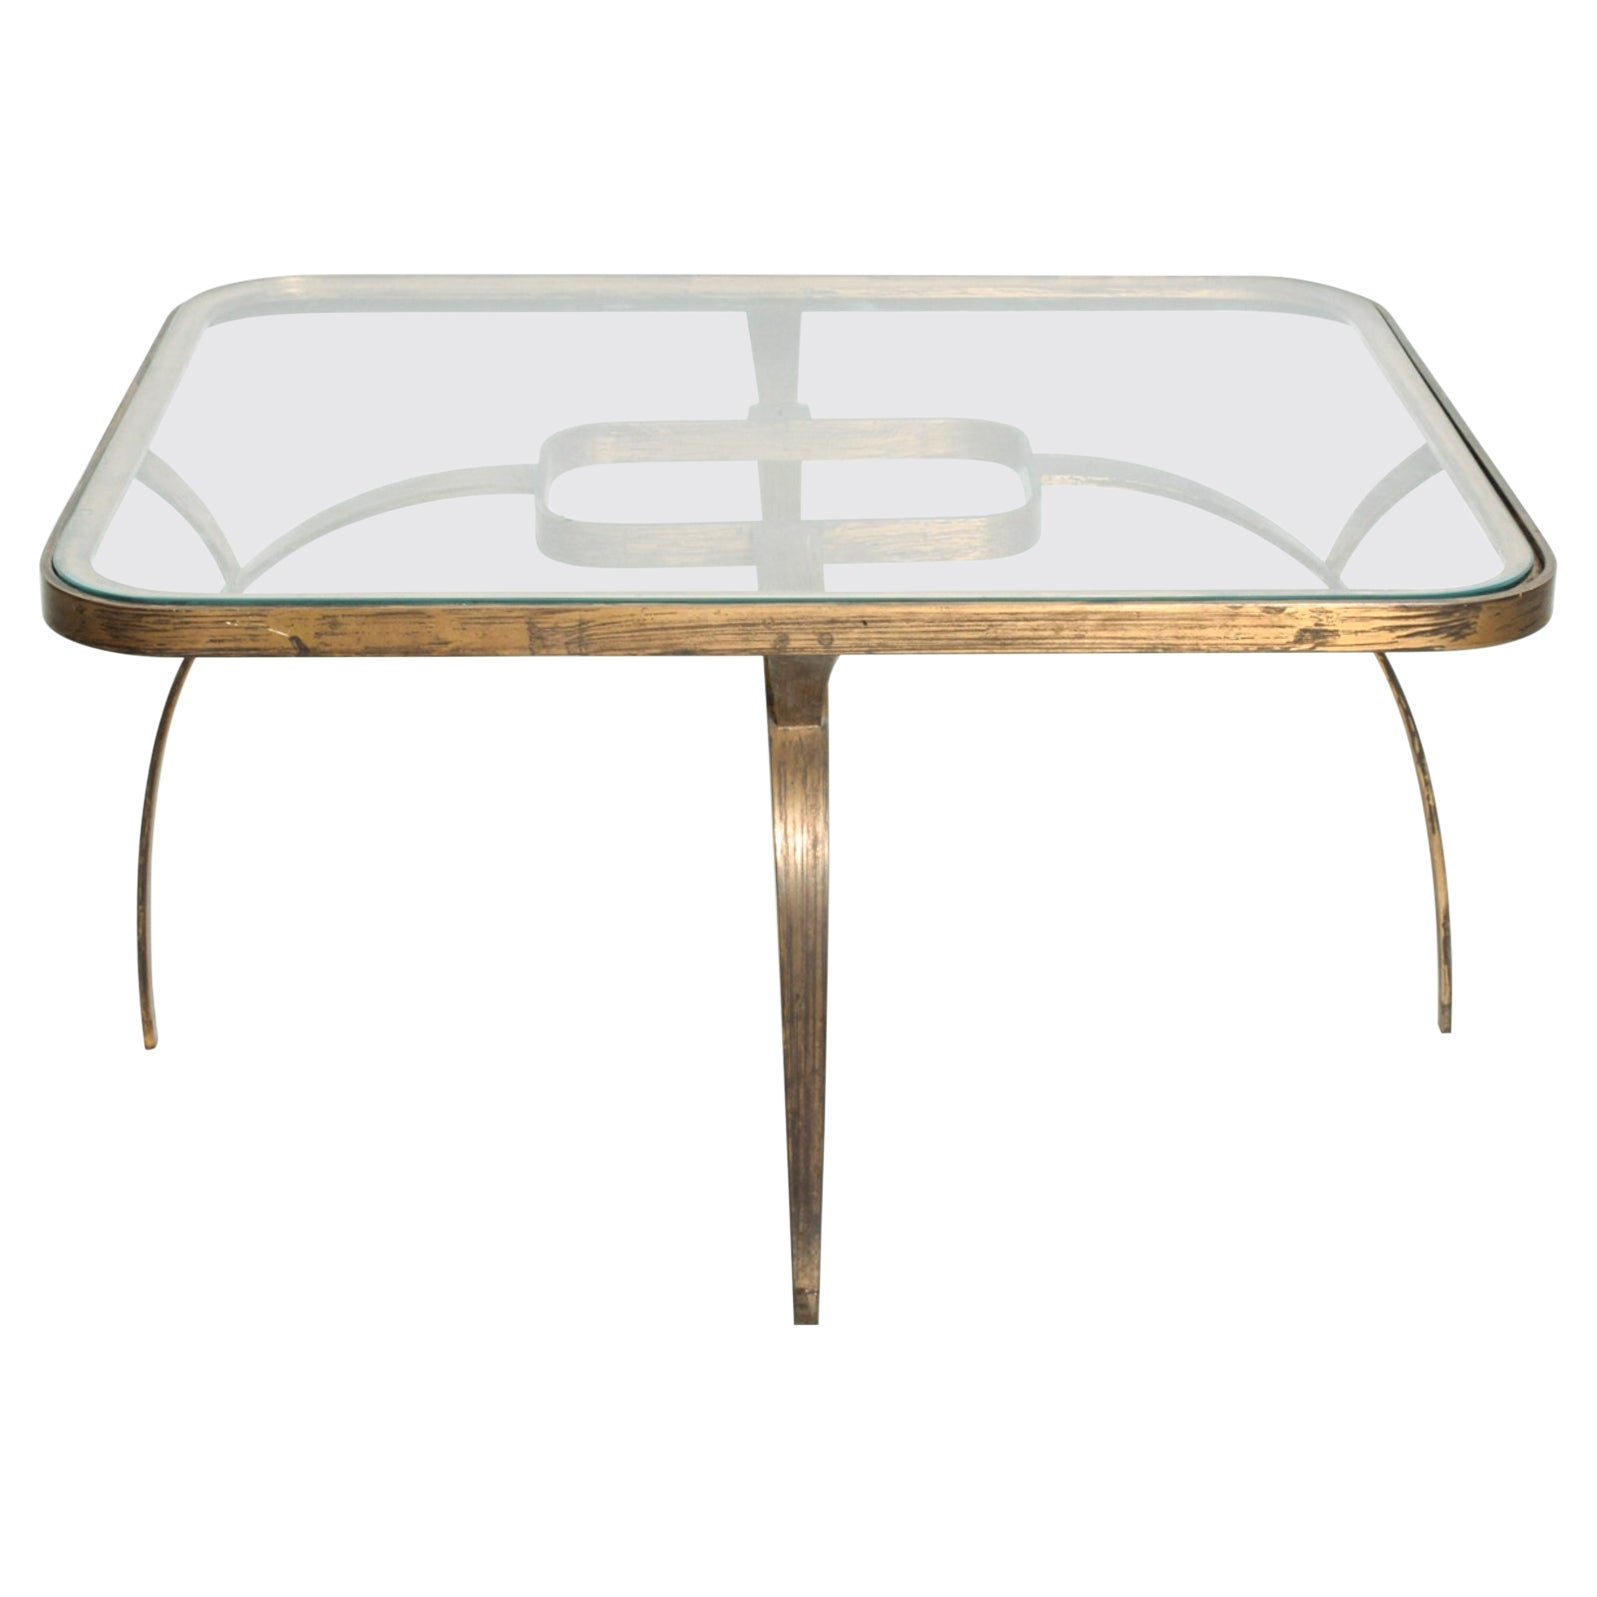 Midcentury Mexican Modernist side coffee table sculptural bronze 
Constructed with bronze glass tabletop. 
 Unmarked. Attributed to Arturo Pani Mexico City 1950s.
Rectangular shape with round corners curvy wishbone legs.
Dimensions: 29.5 W x 23 75.